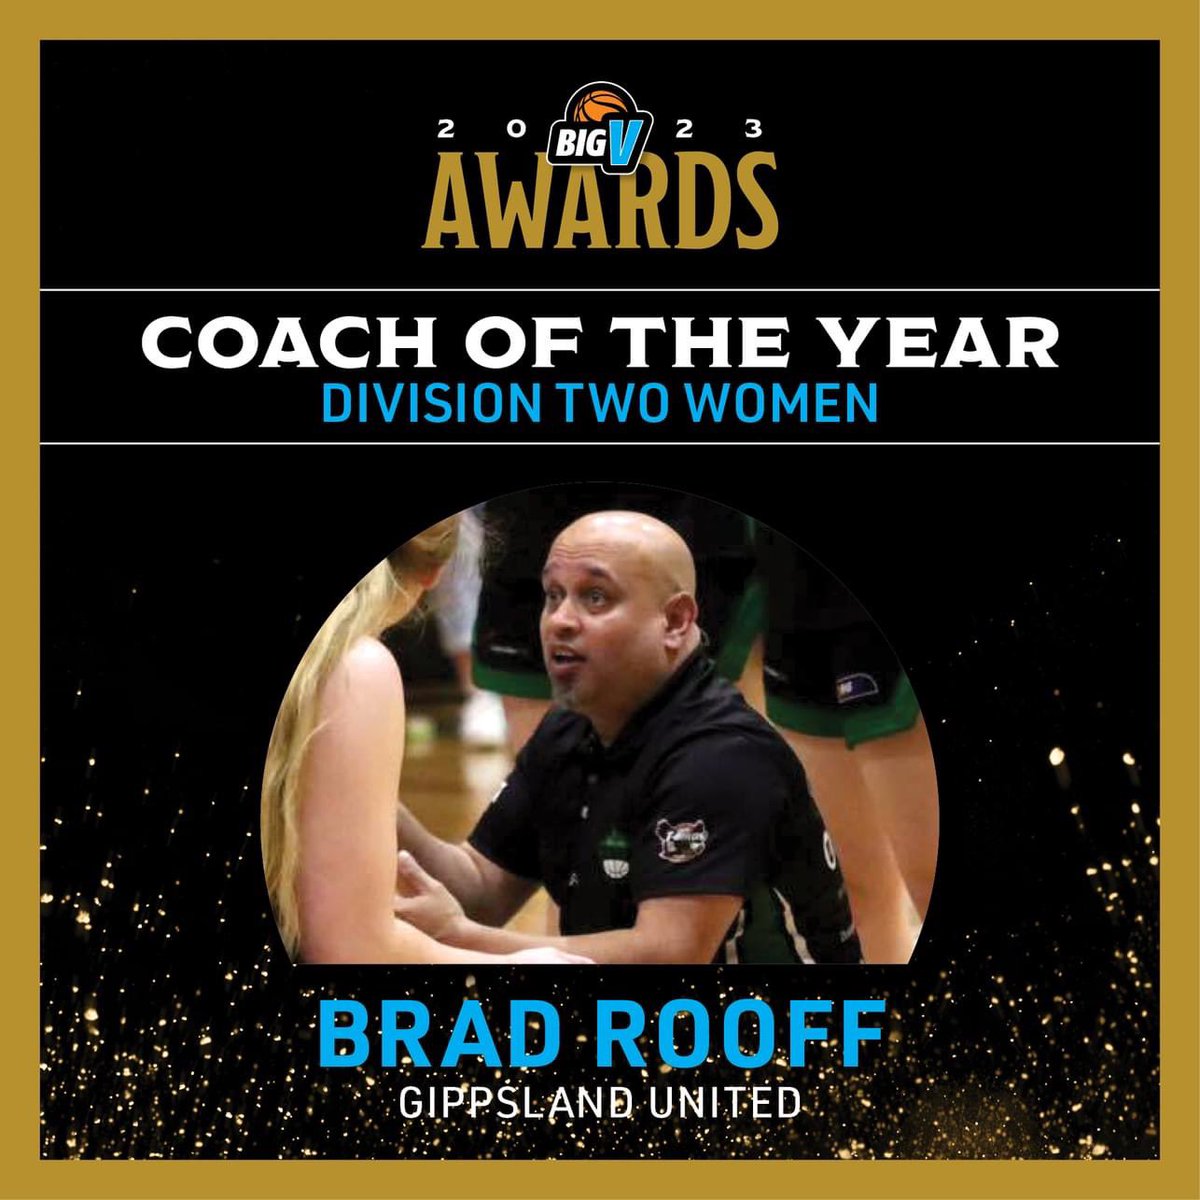 Congratulations to @Basketball_Vic Coach of the Year Bead Rooff!